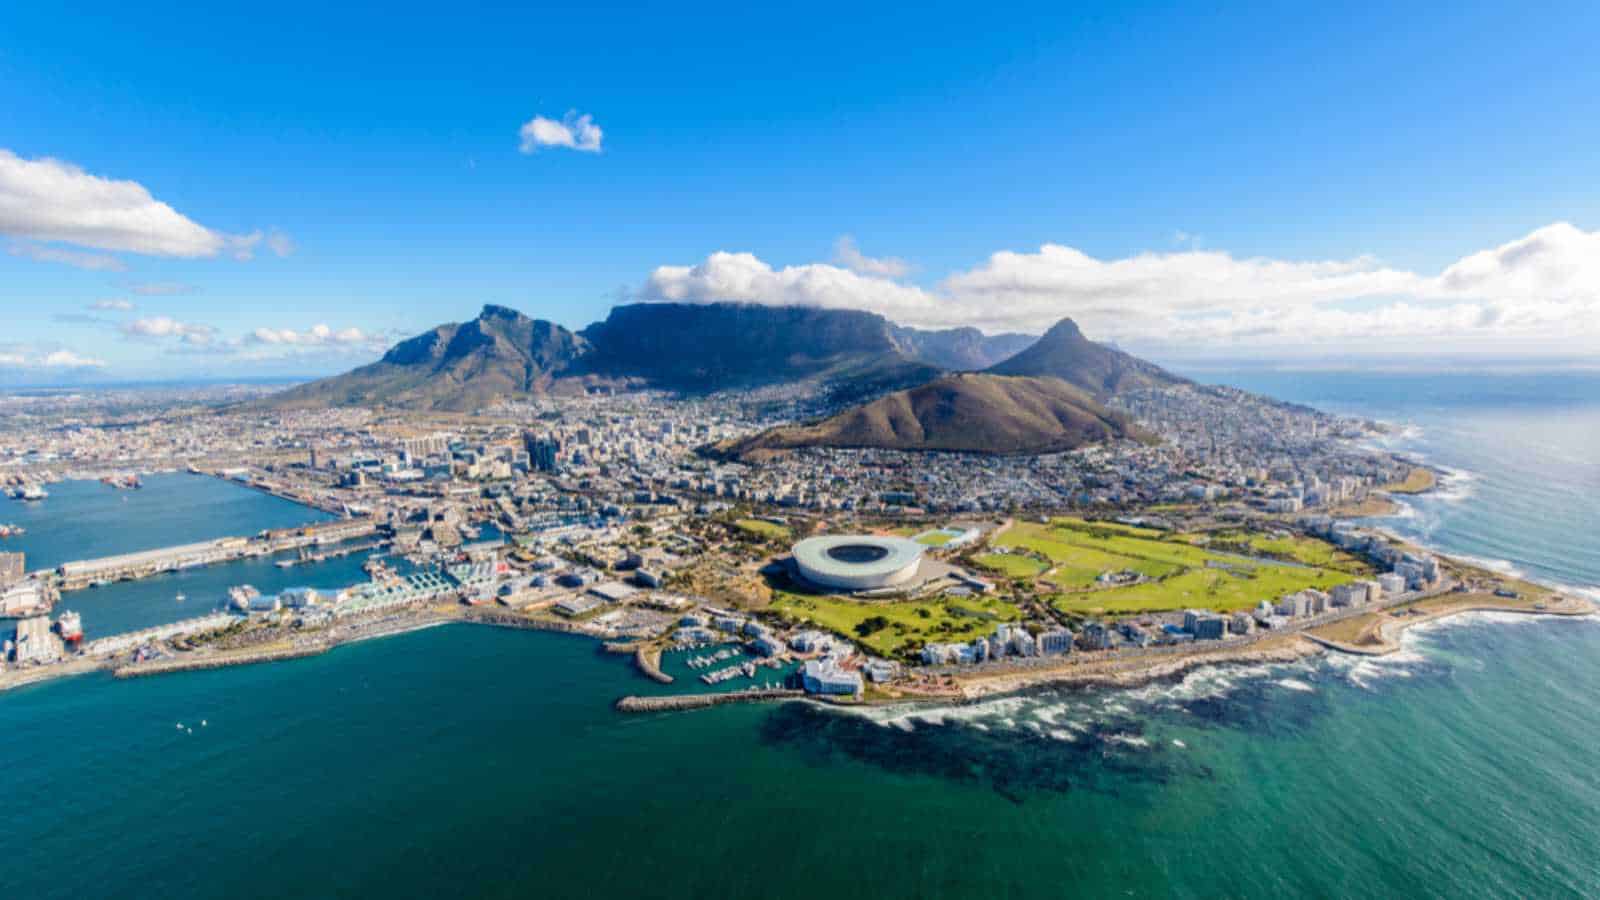 Aerial view of Cape Town, South Africa on a sunny afternoon. Photo taken from a helicopter during air tour of Cape Town